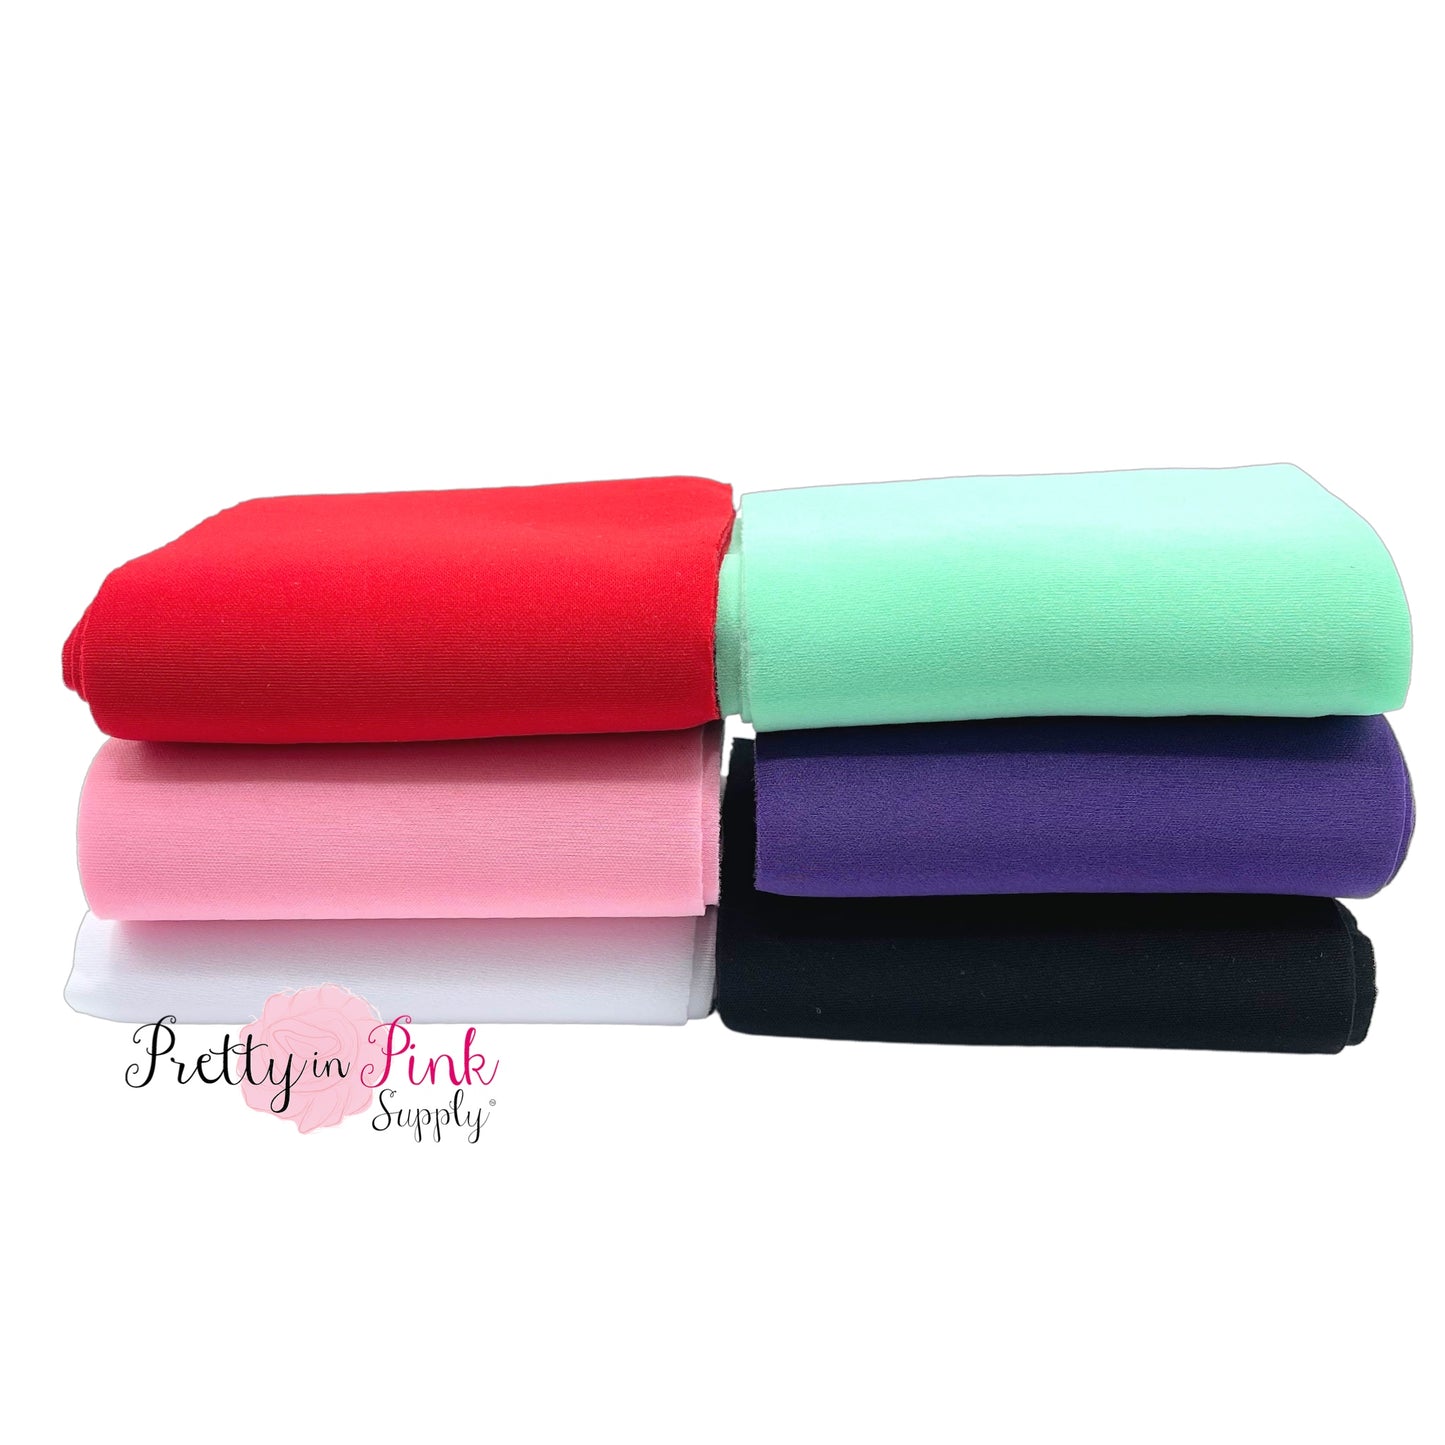 Folded solid colored neoprene fabric in red, light aqua, purple, black, light pink, and white.